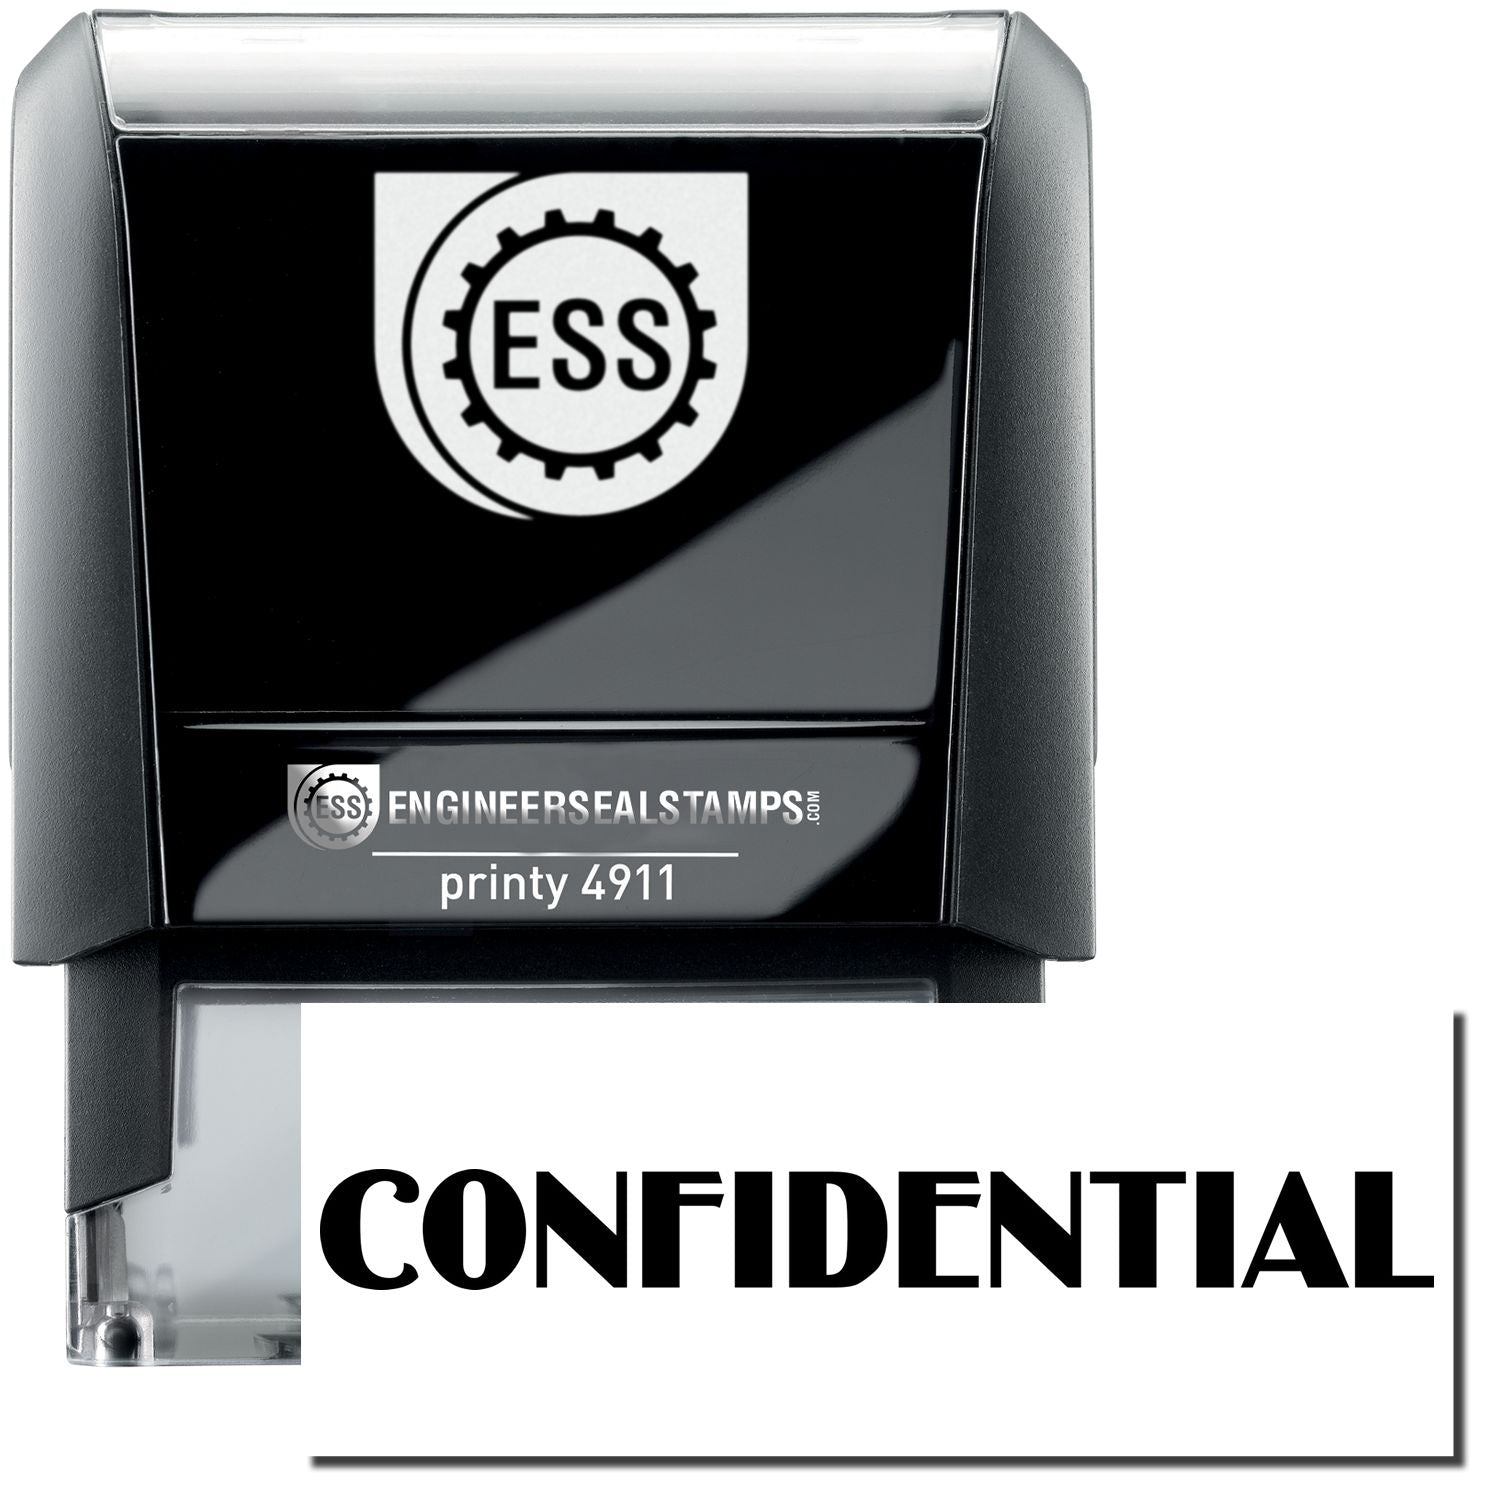 A self-inking stamp with a stamped image showing how the text "CONFIDENTIAL" in an optima font is displayed after stamping.